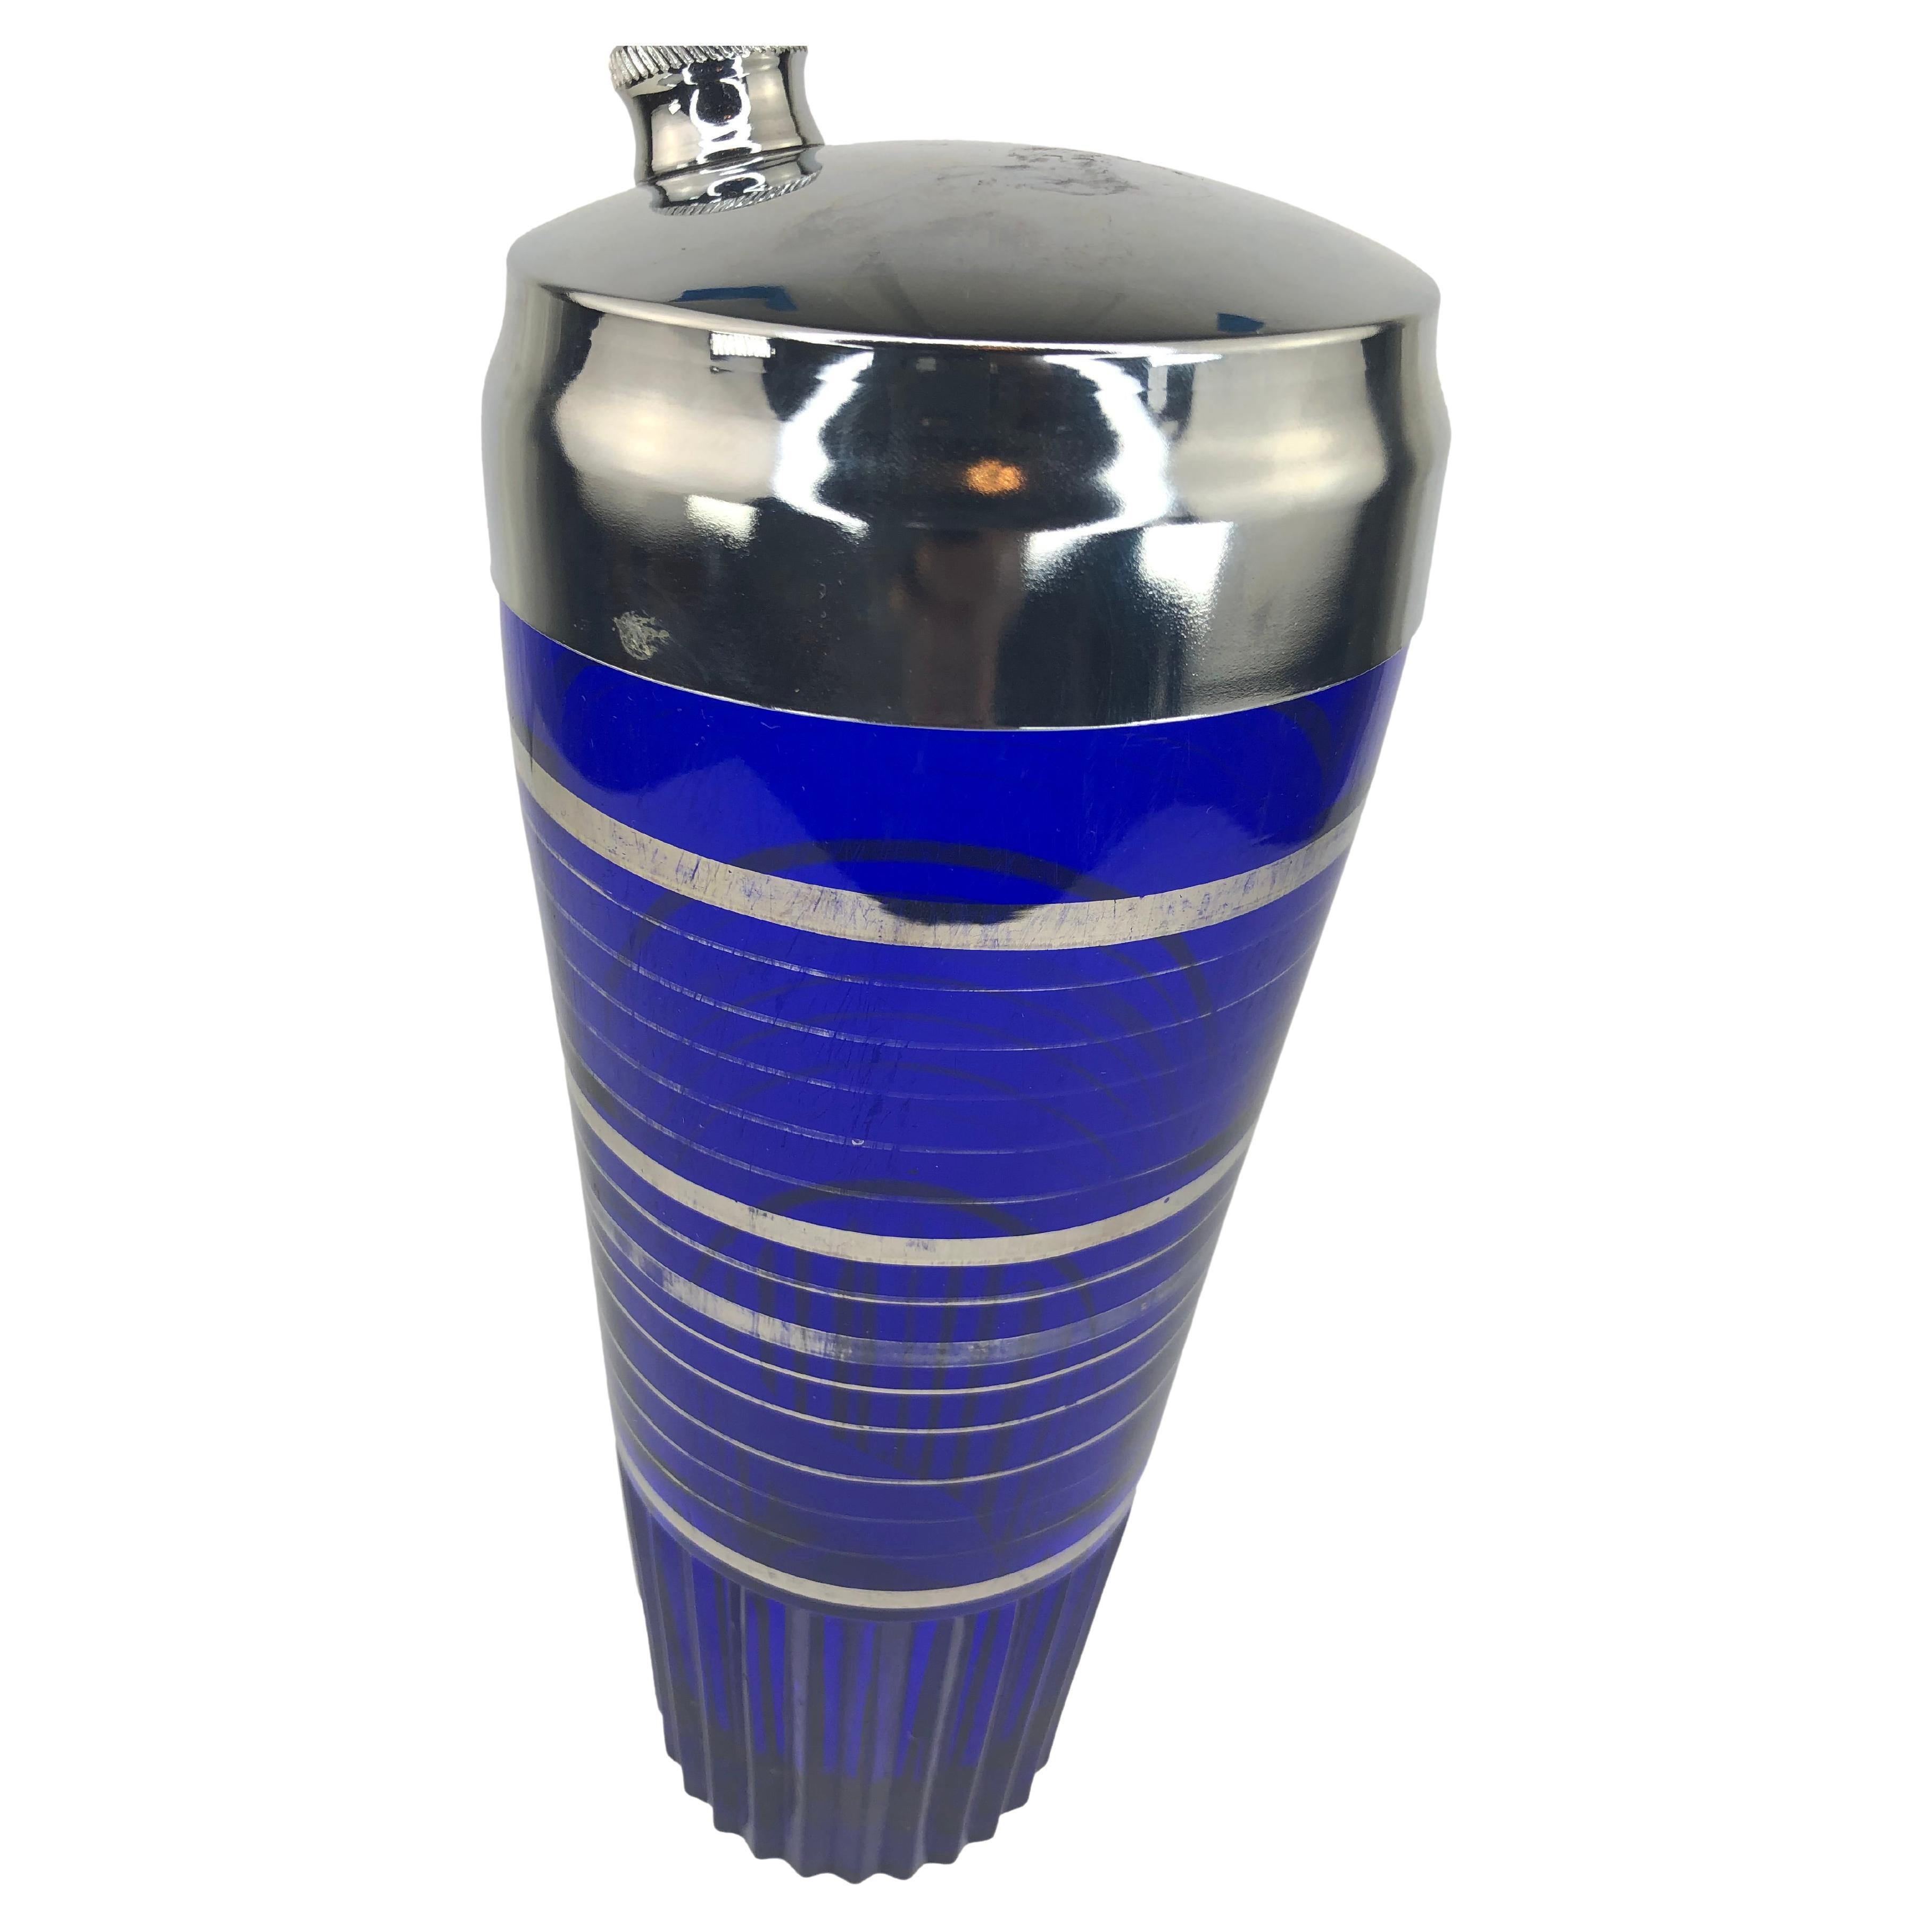 Art Deco Cobalt Blue Cocktail Shaker With Silver Overlay Bands and Fluted Base. Shaker has a small chip at the base, shown in photos. Diameter measurement of 3.5